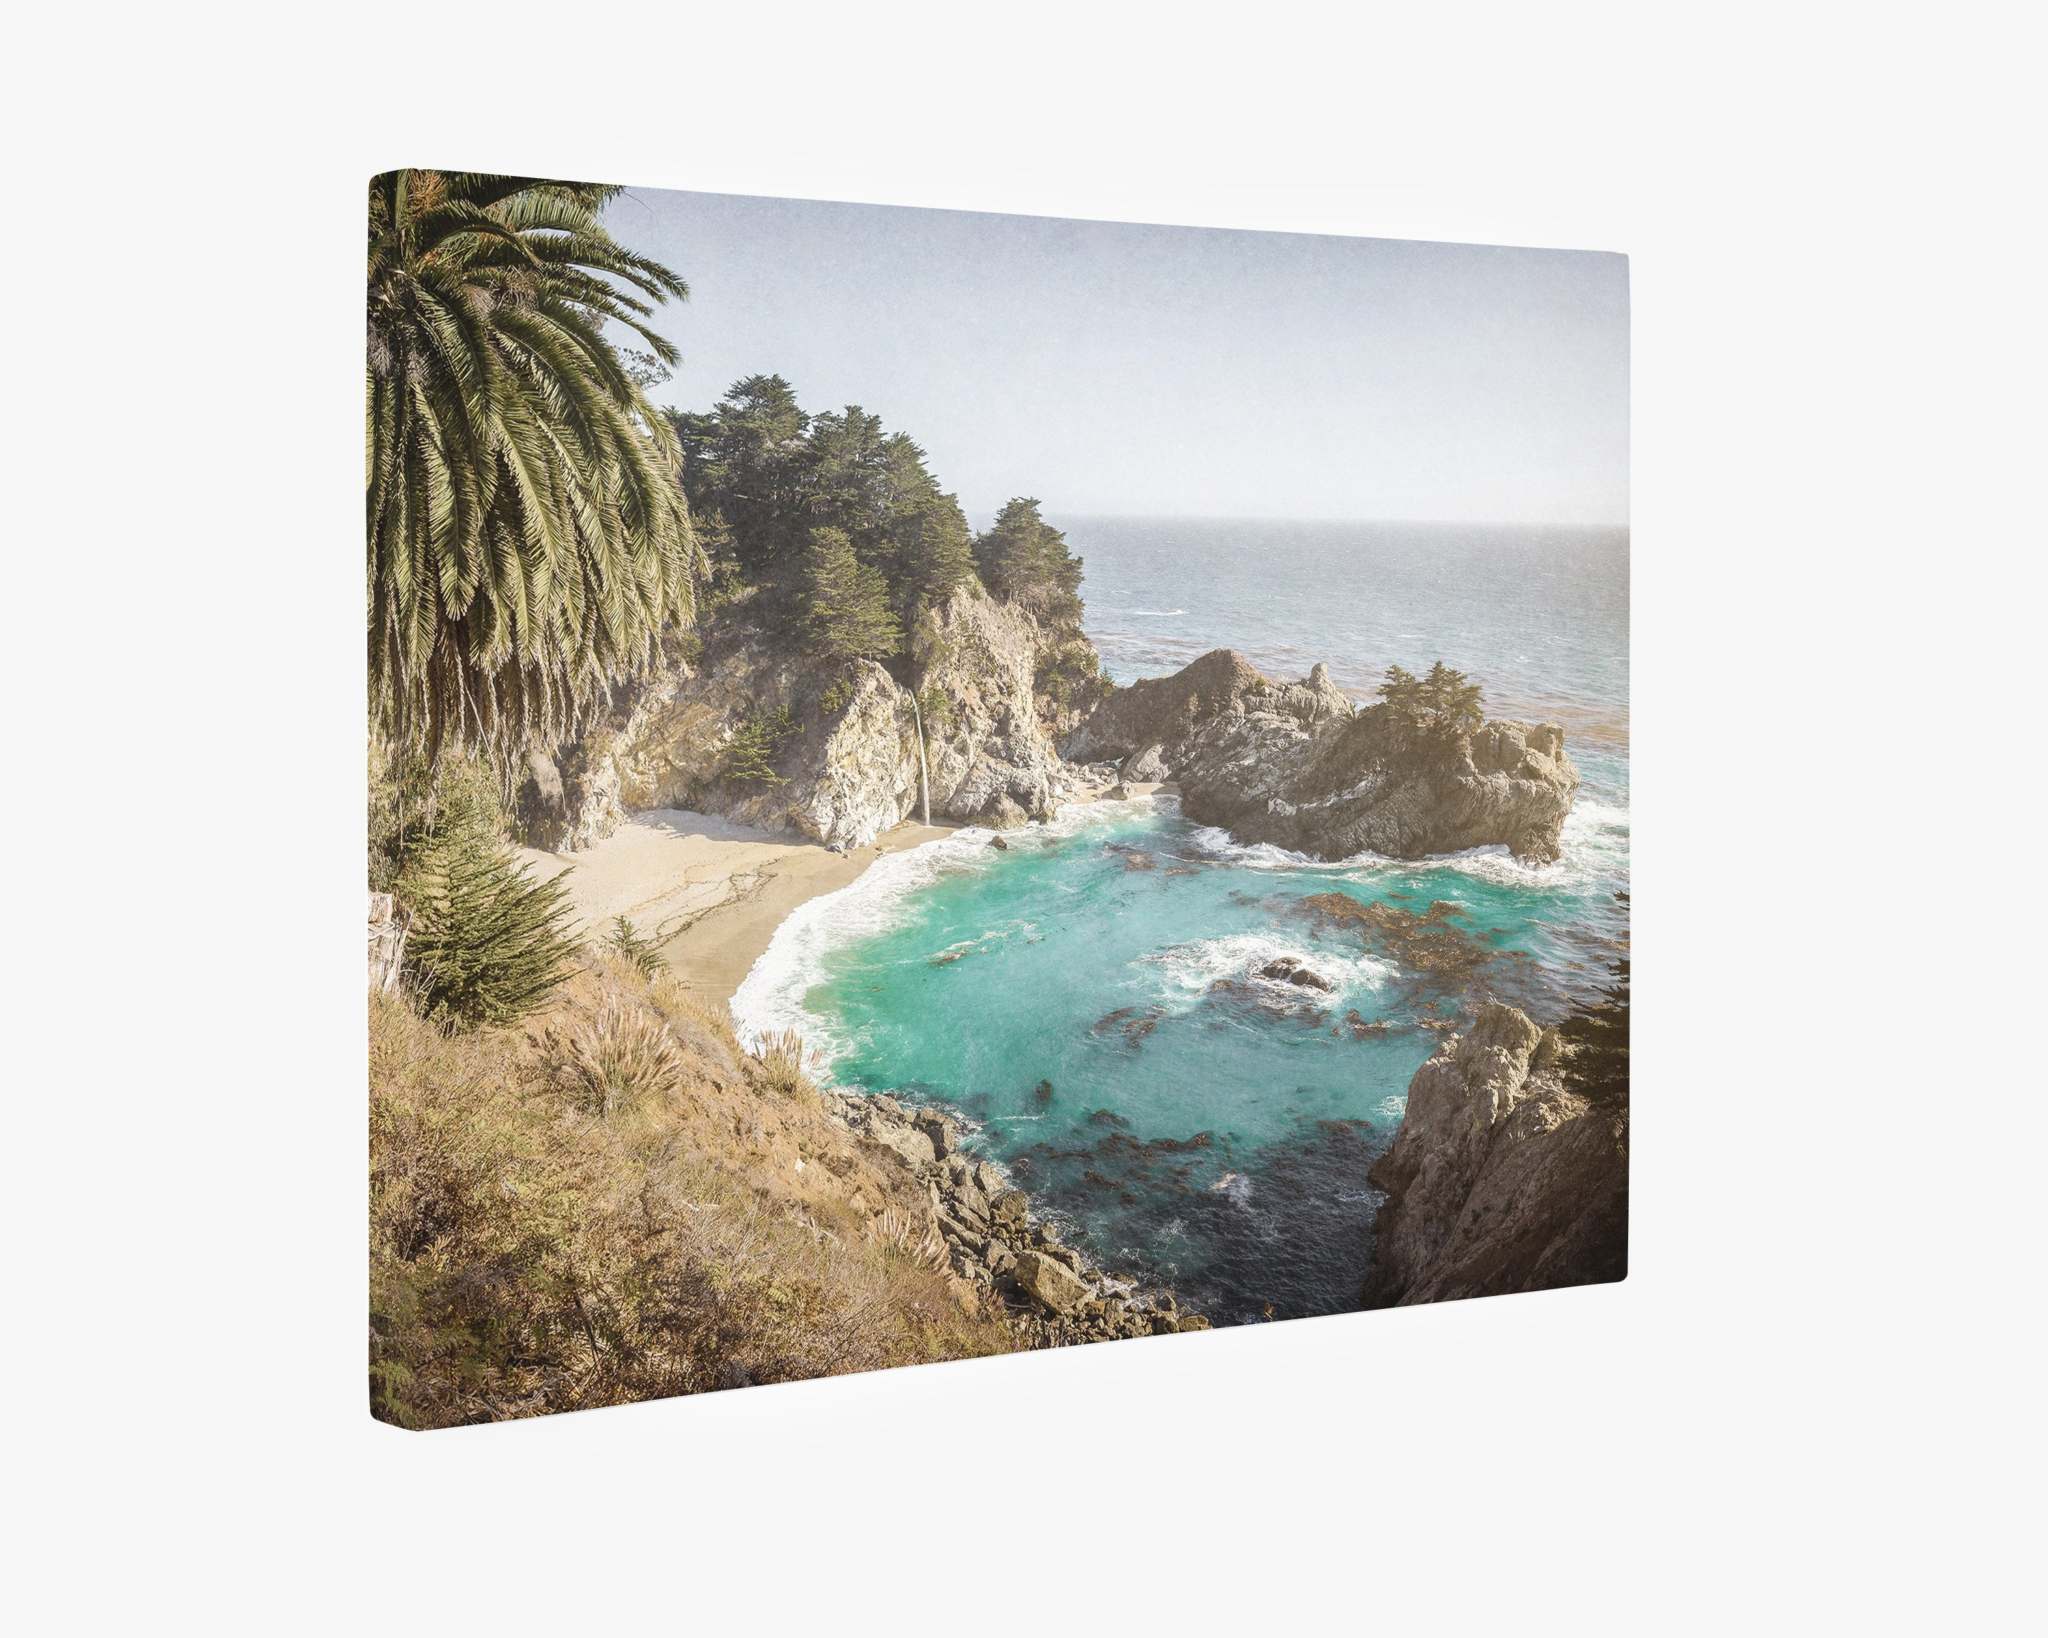 An Offley Green Big Sur Canvas Wall Art, &#39;Julia Pffeifer,&#39; featuring a secluded beach surrounded by rugged cliffs and lush vegetation. Turquoise waves gently wash onto the shore under a peaceful, clear sky. Dense trees, including a tall palm, cover the cliffside, capturing the essence of Big Sur wall art.